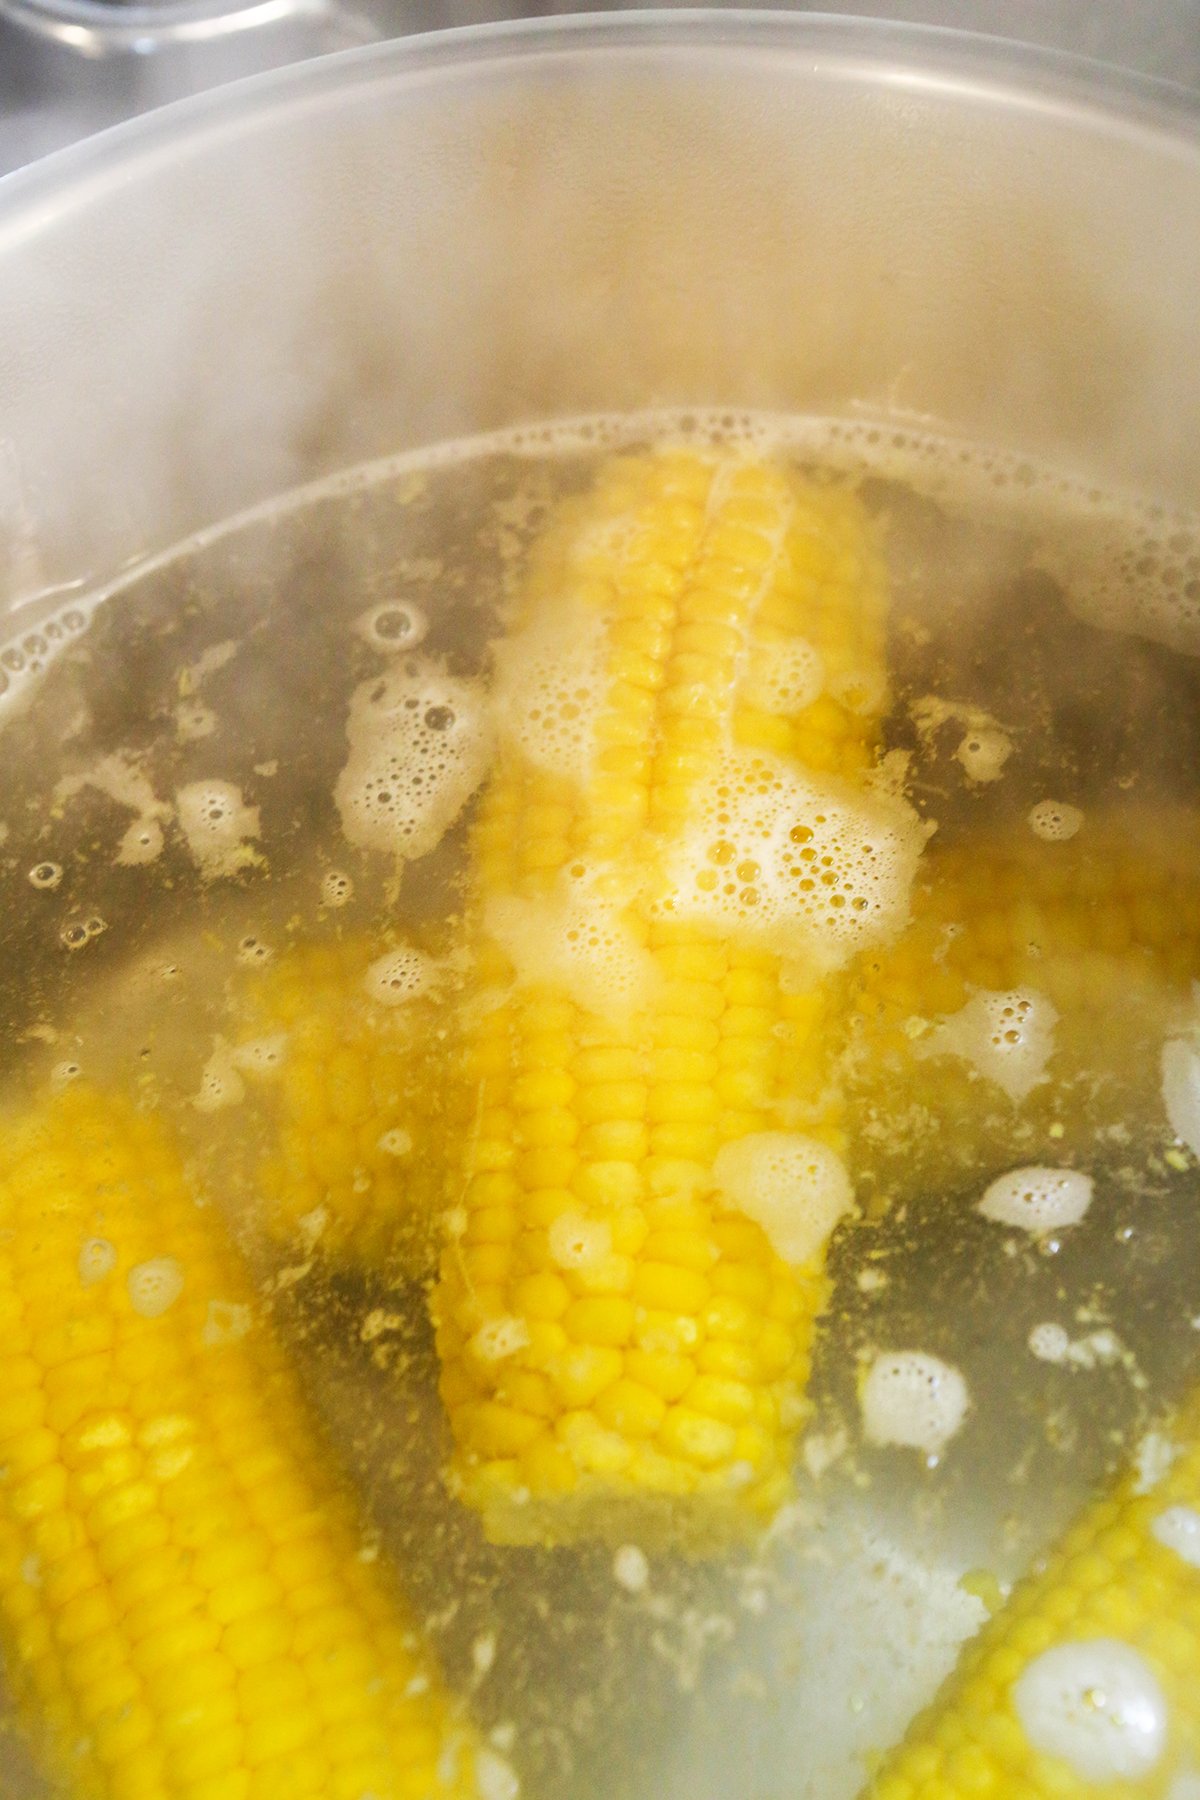 Corn on the cob being boiled in a large pot of water.